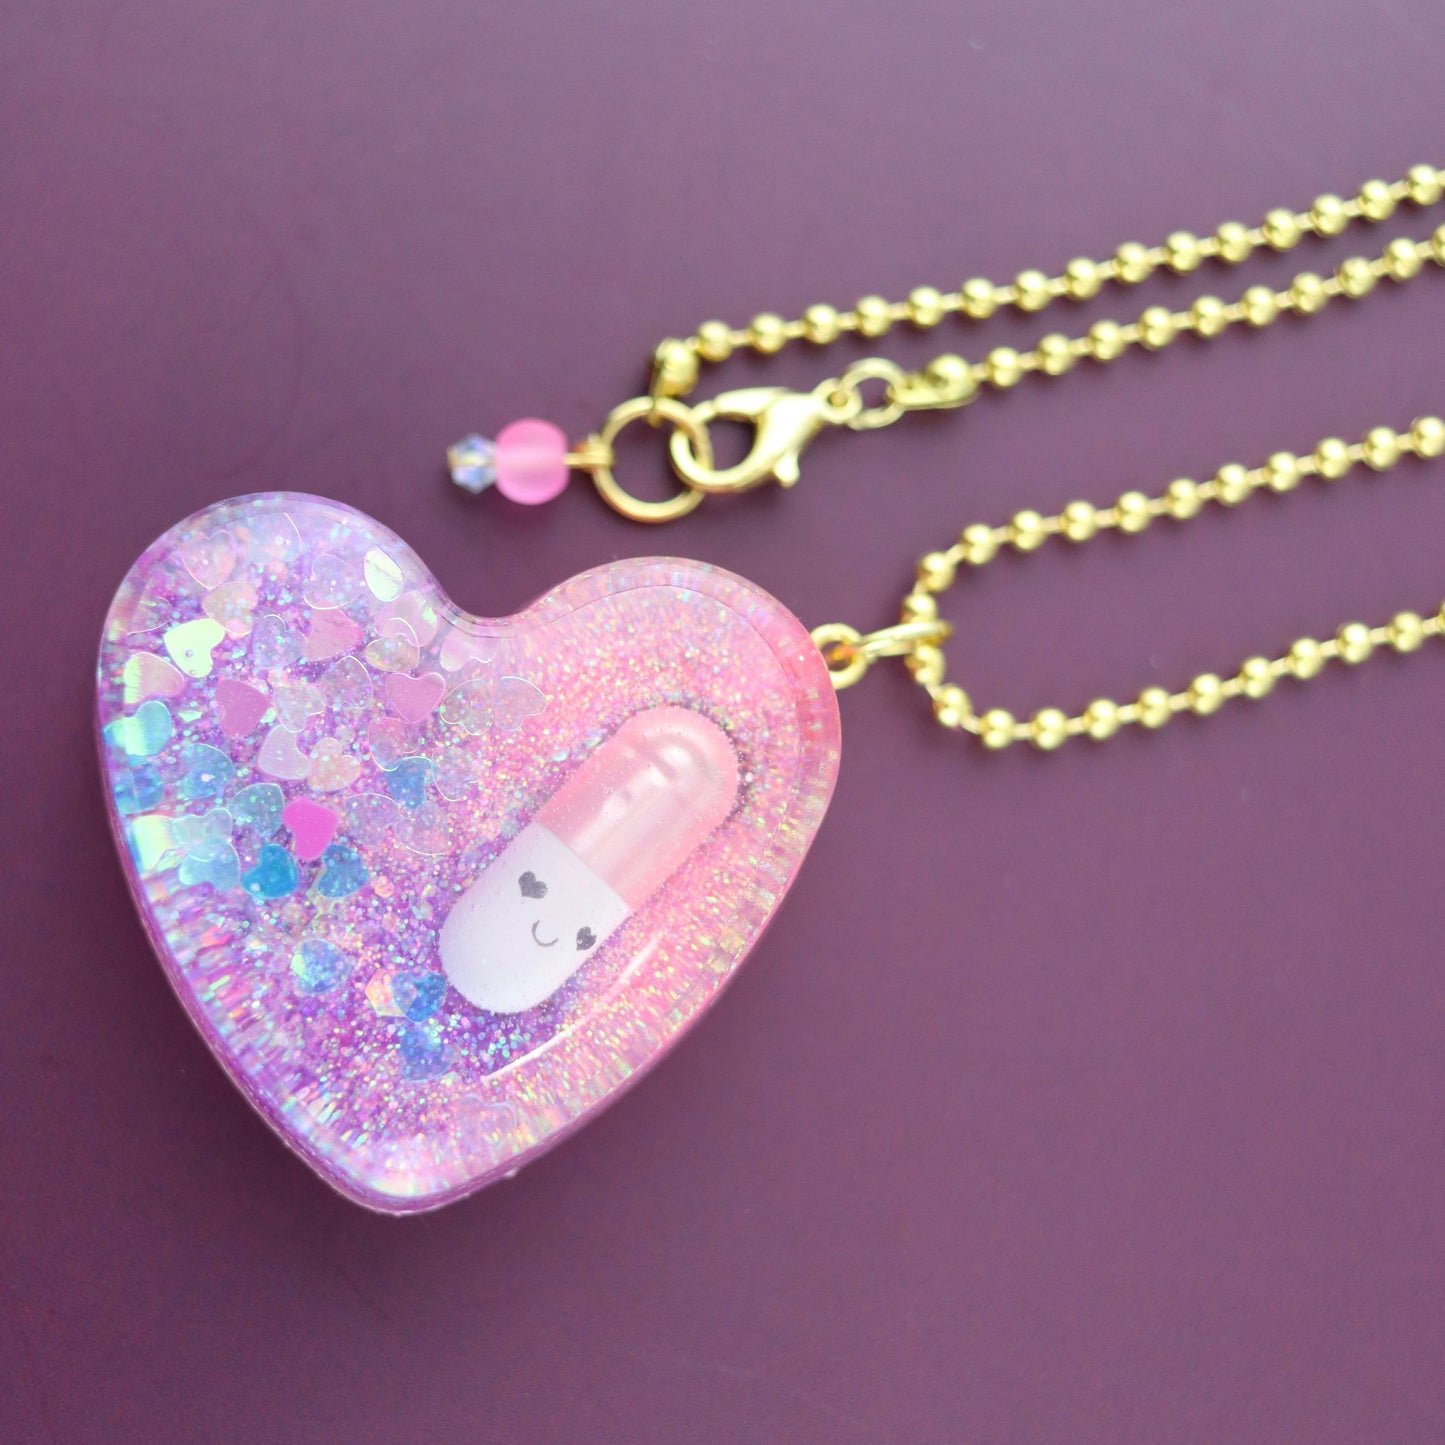 “Electro Pill Pop” OG Heart Necklace – with Gold Hardware NGH-1014